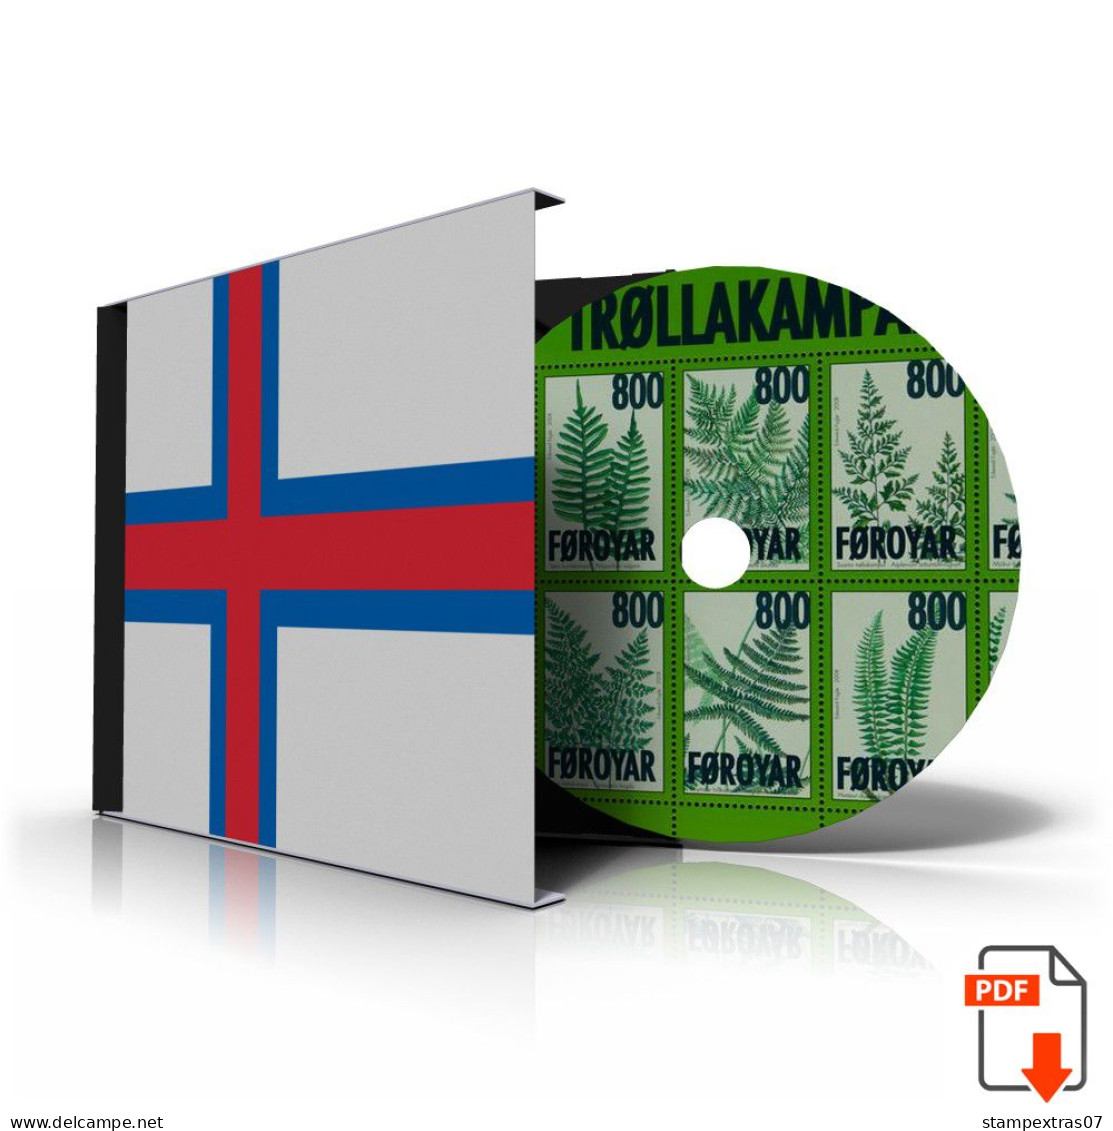 FAROE ISLANDS STAMP ALBUM PAGES 1919-2011 (87 Color Illustrated Pages) - Englisch